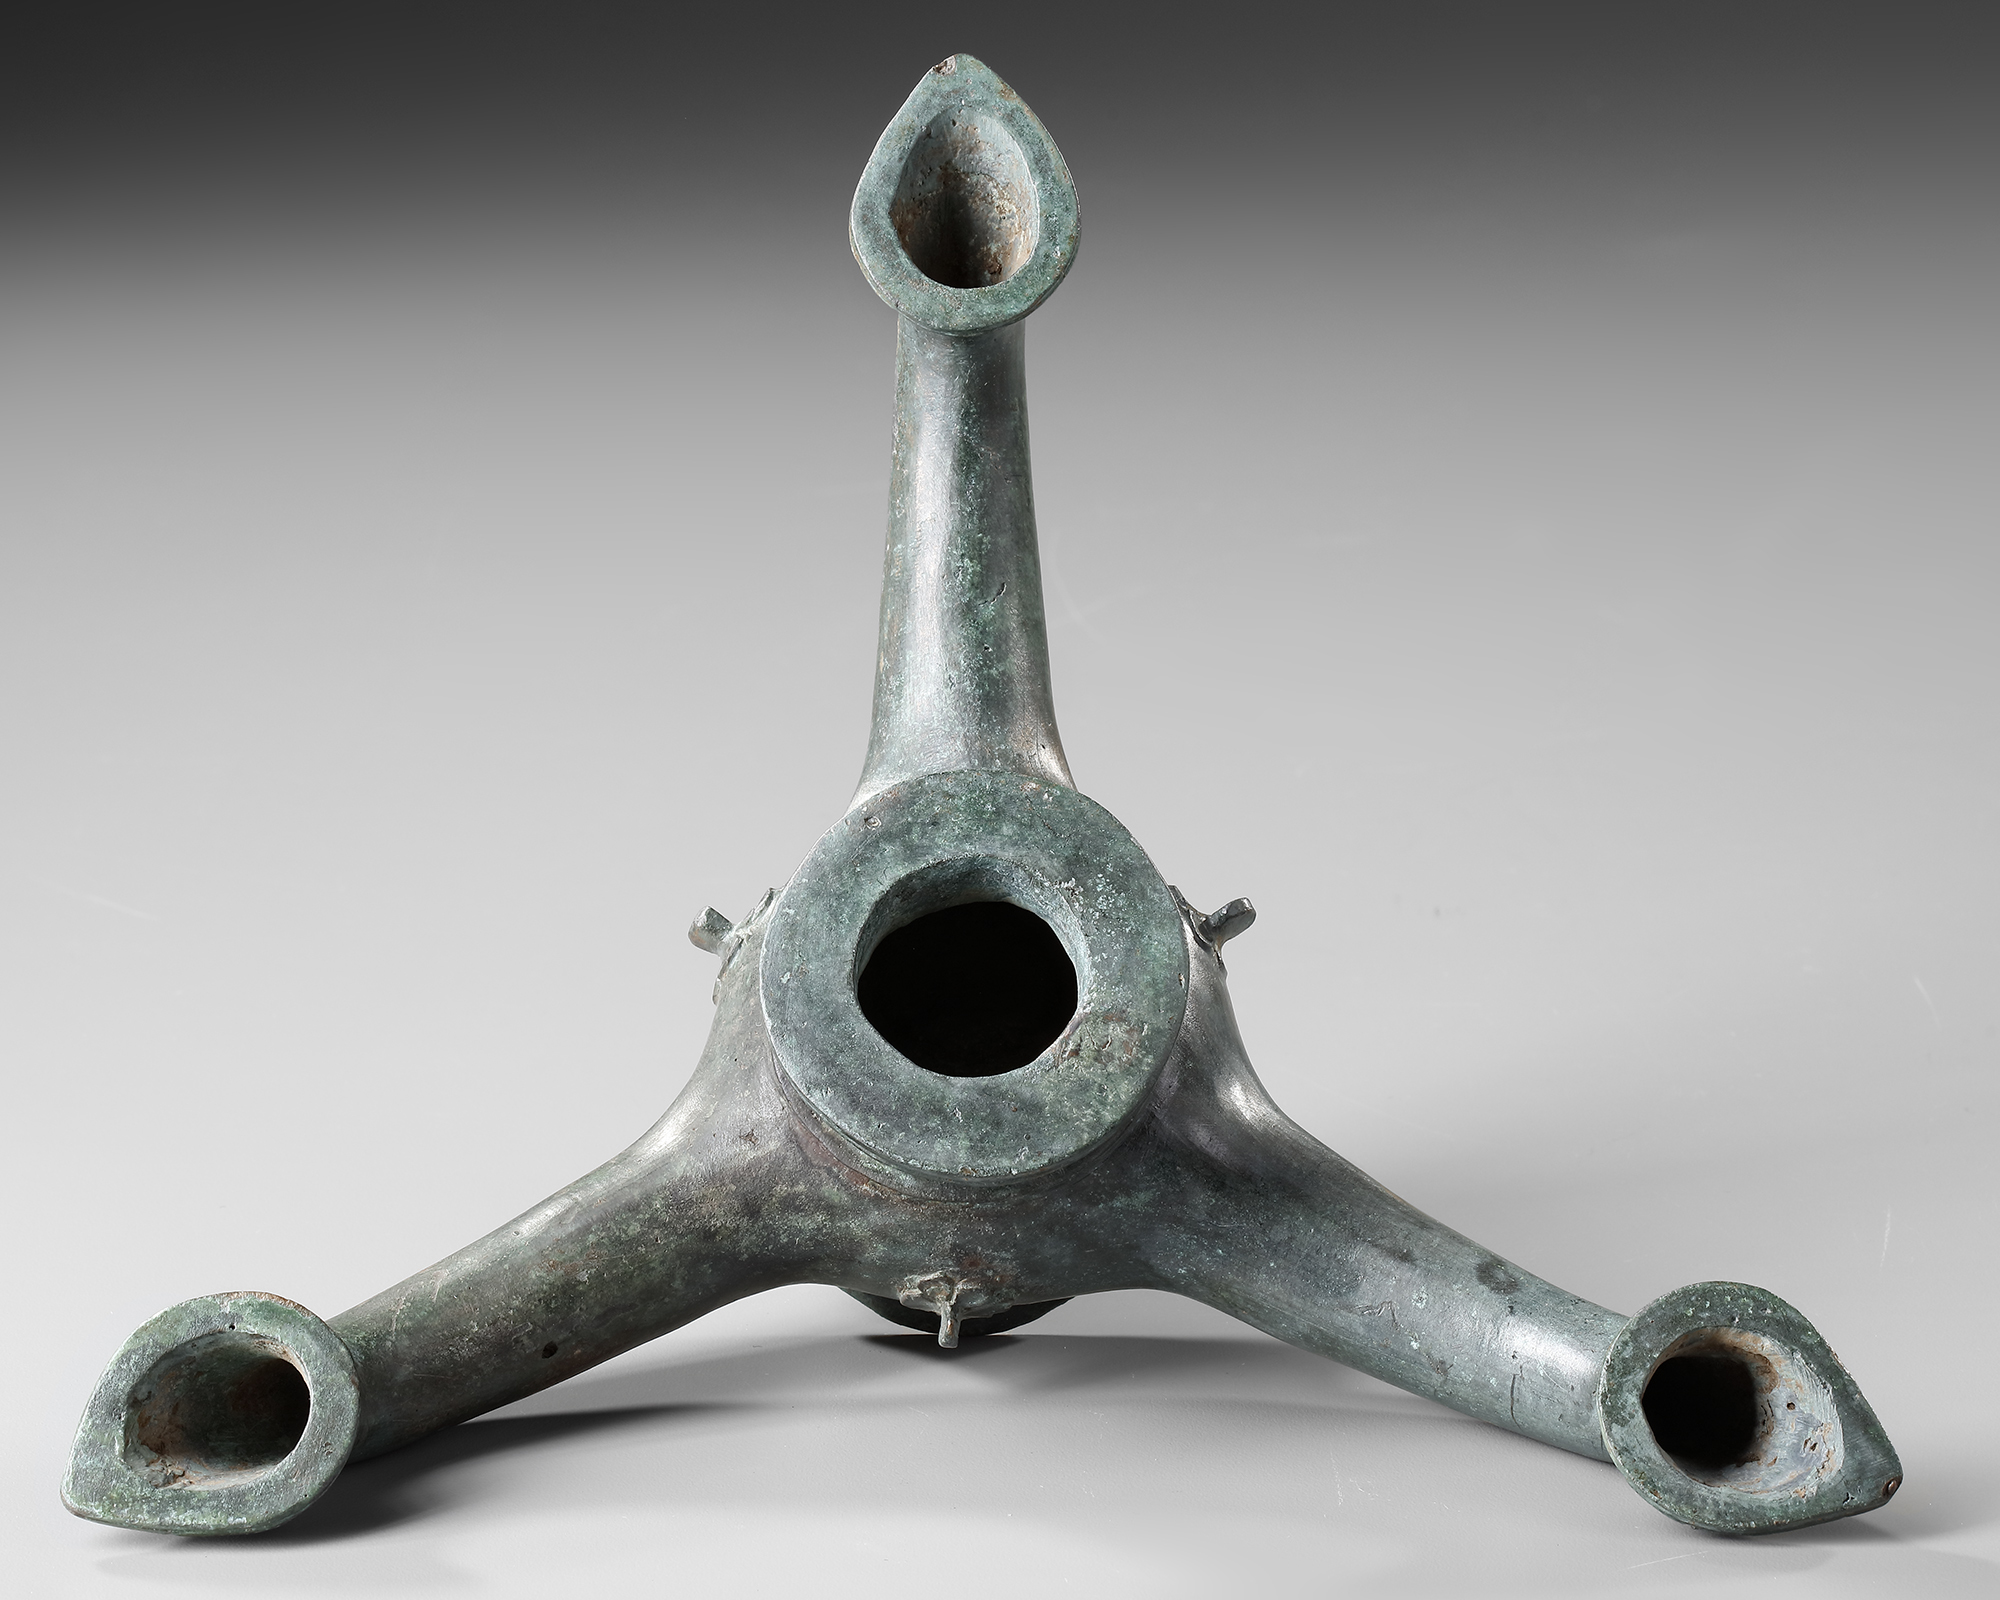 A BYZANTINE THREE -SPOUTED BRONZE OIL LAMP, CIRCA 4TH-5TH CENTURY A.D. - Image 3 of 4